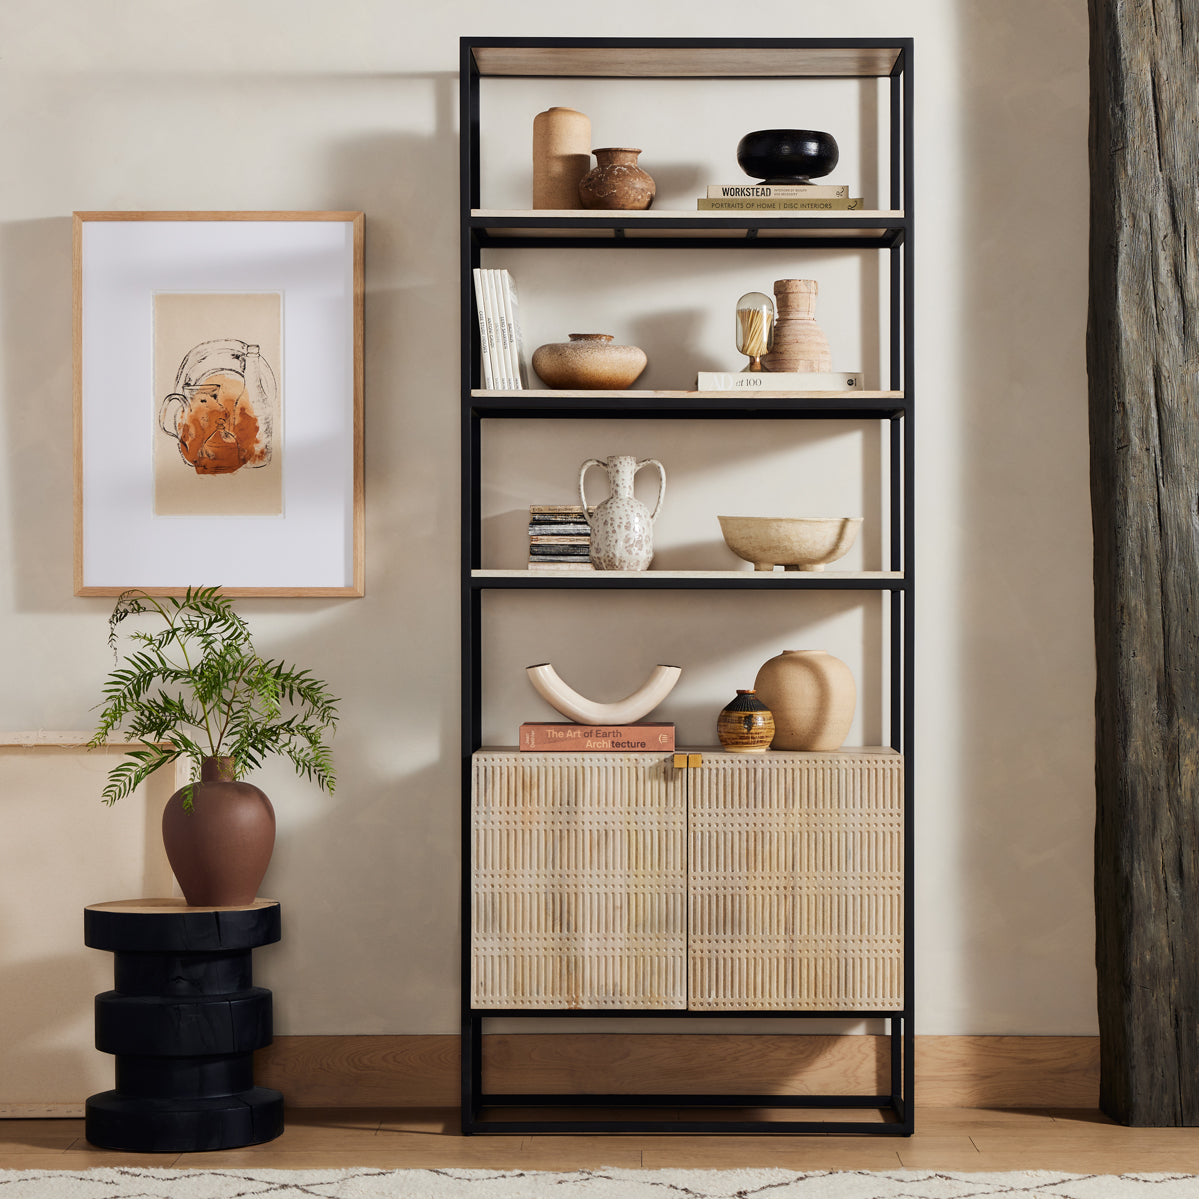 Four Hands Clara Kelby Bookcase